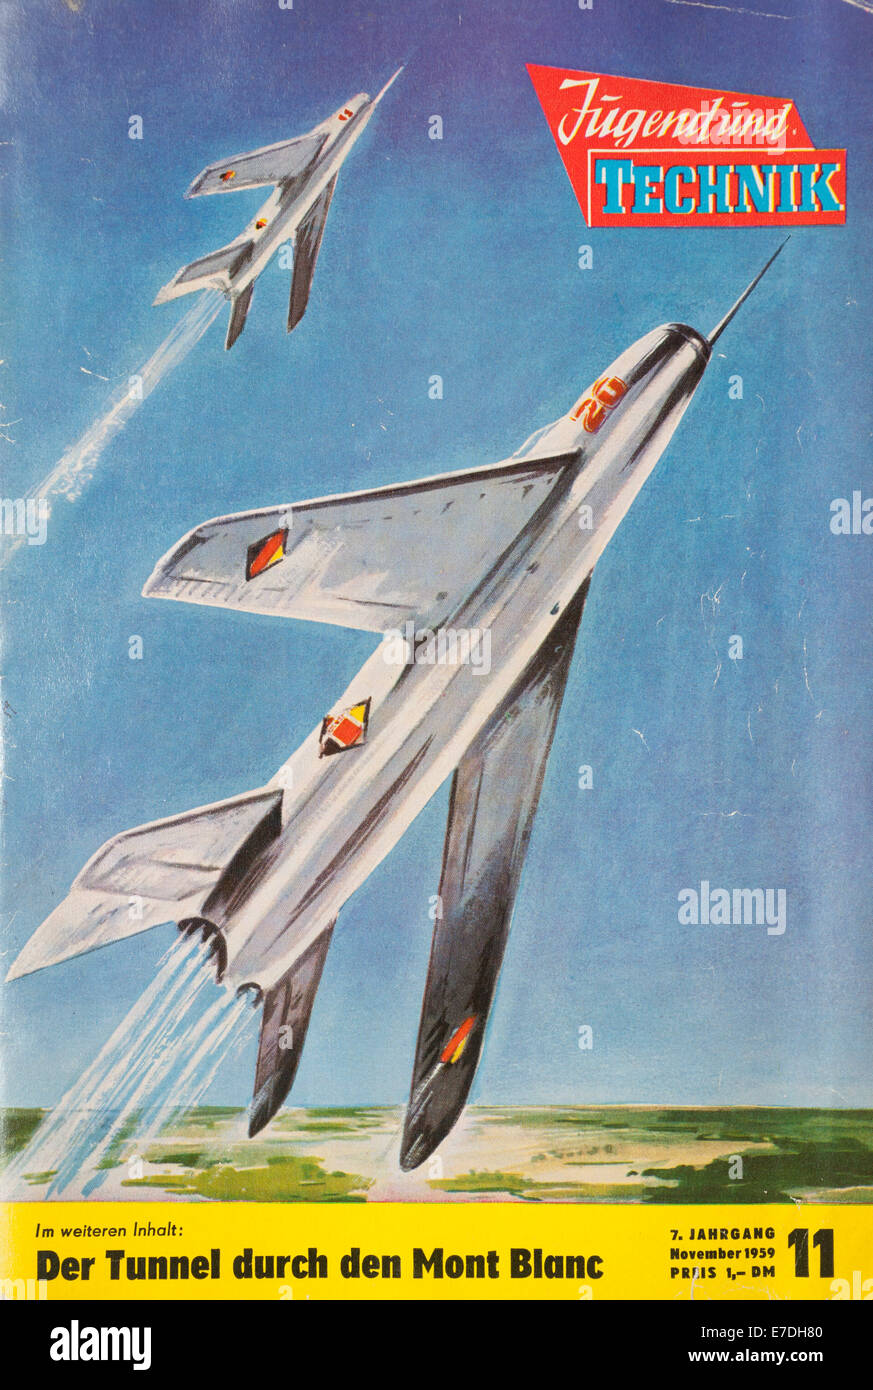 The cover illustration of the November 1959 edition of the magazine 'Youth  and Technology' shows two Russian MIG 21 supersonic jet fighter aircraft.  The MIG 21 is the most-produced combat aircraft in